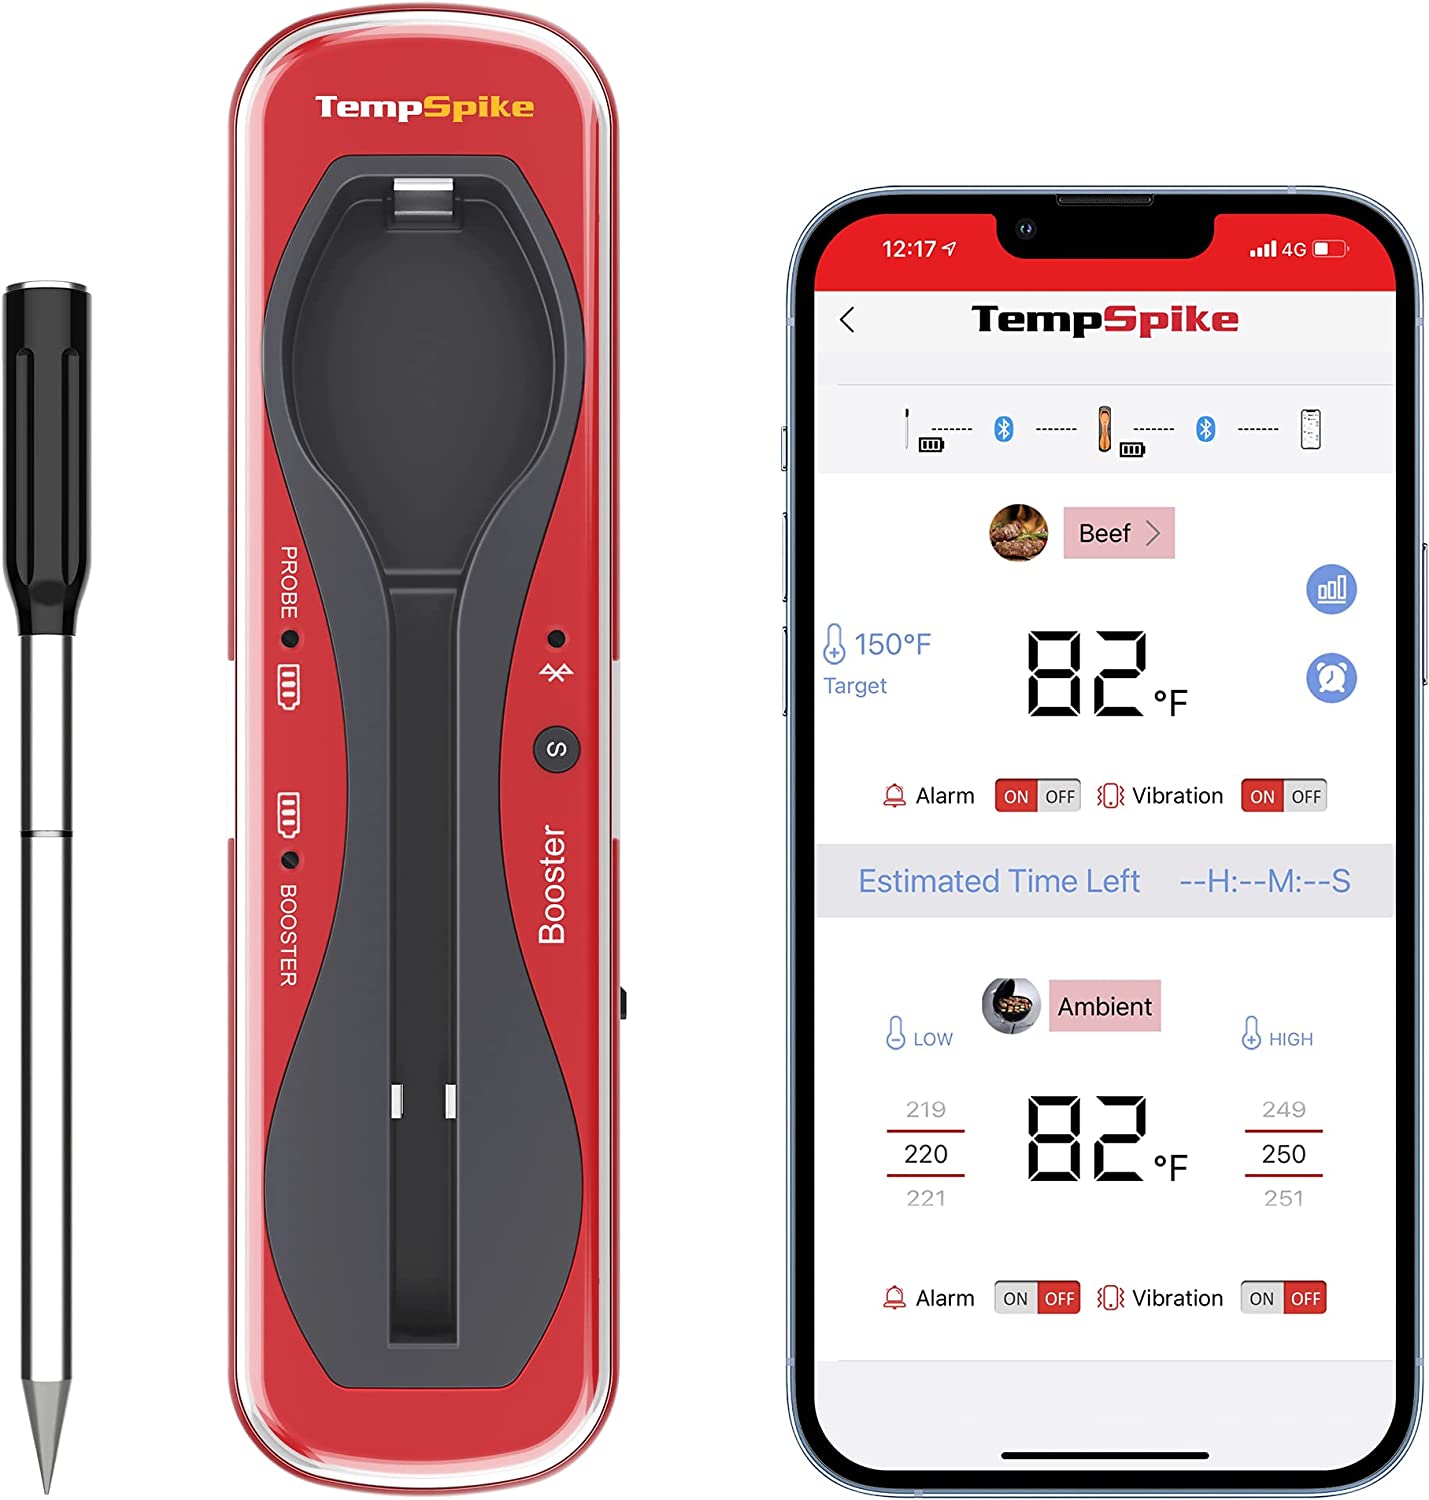 ThermoPro TP28 500FT Long Range Wireless Meat Thermometer with Dual Probe  for Smoker BBQ Grill Thermometer in Orange